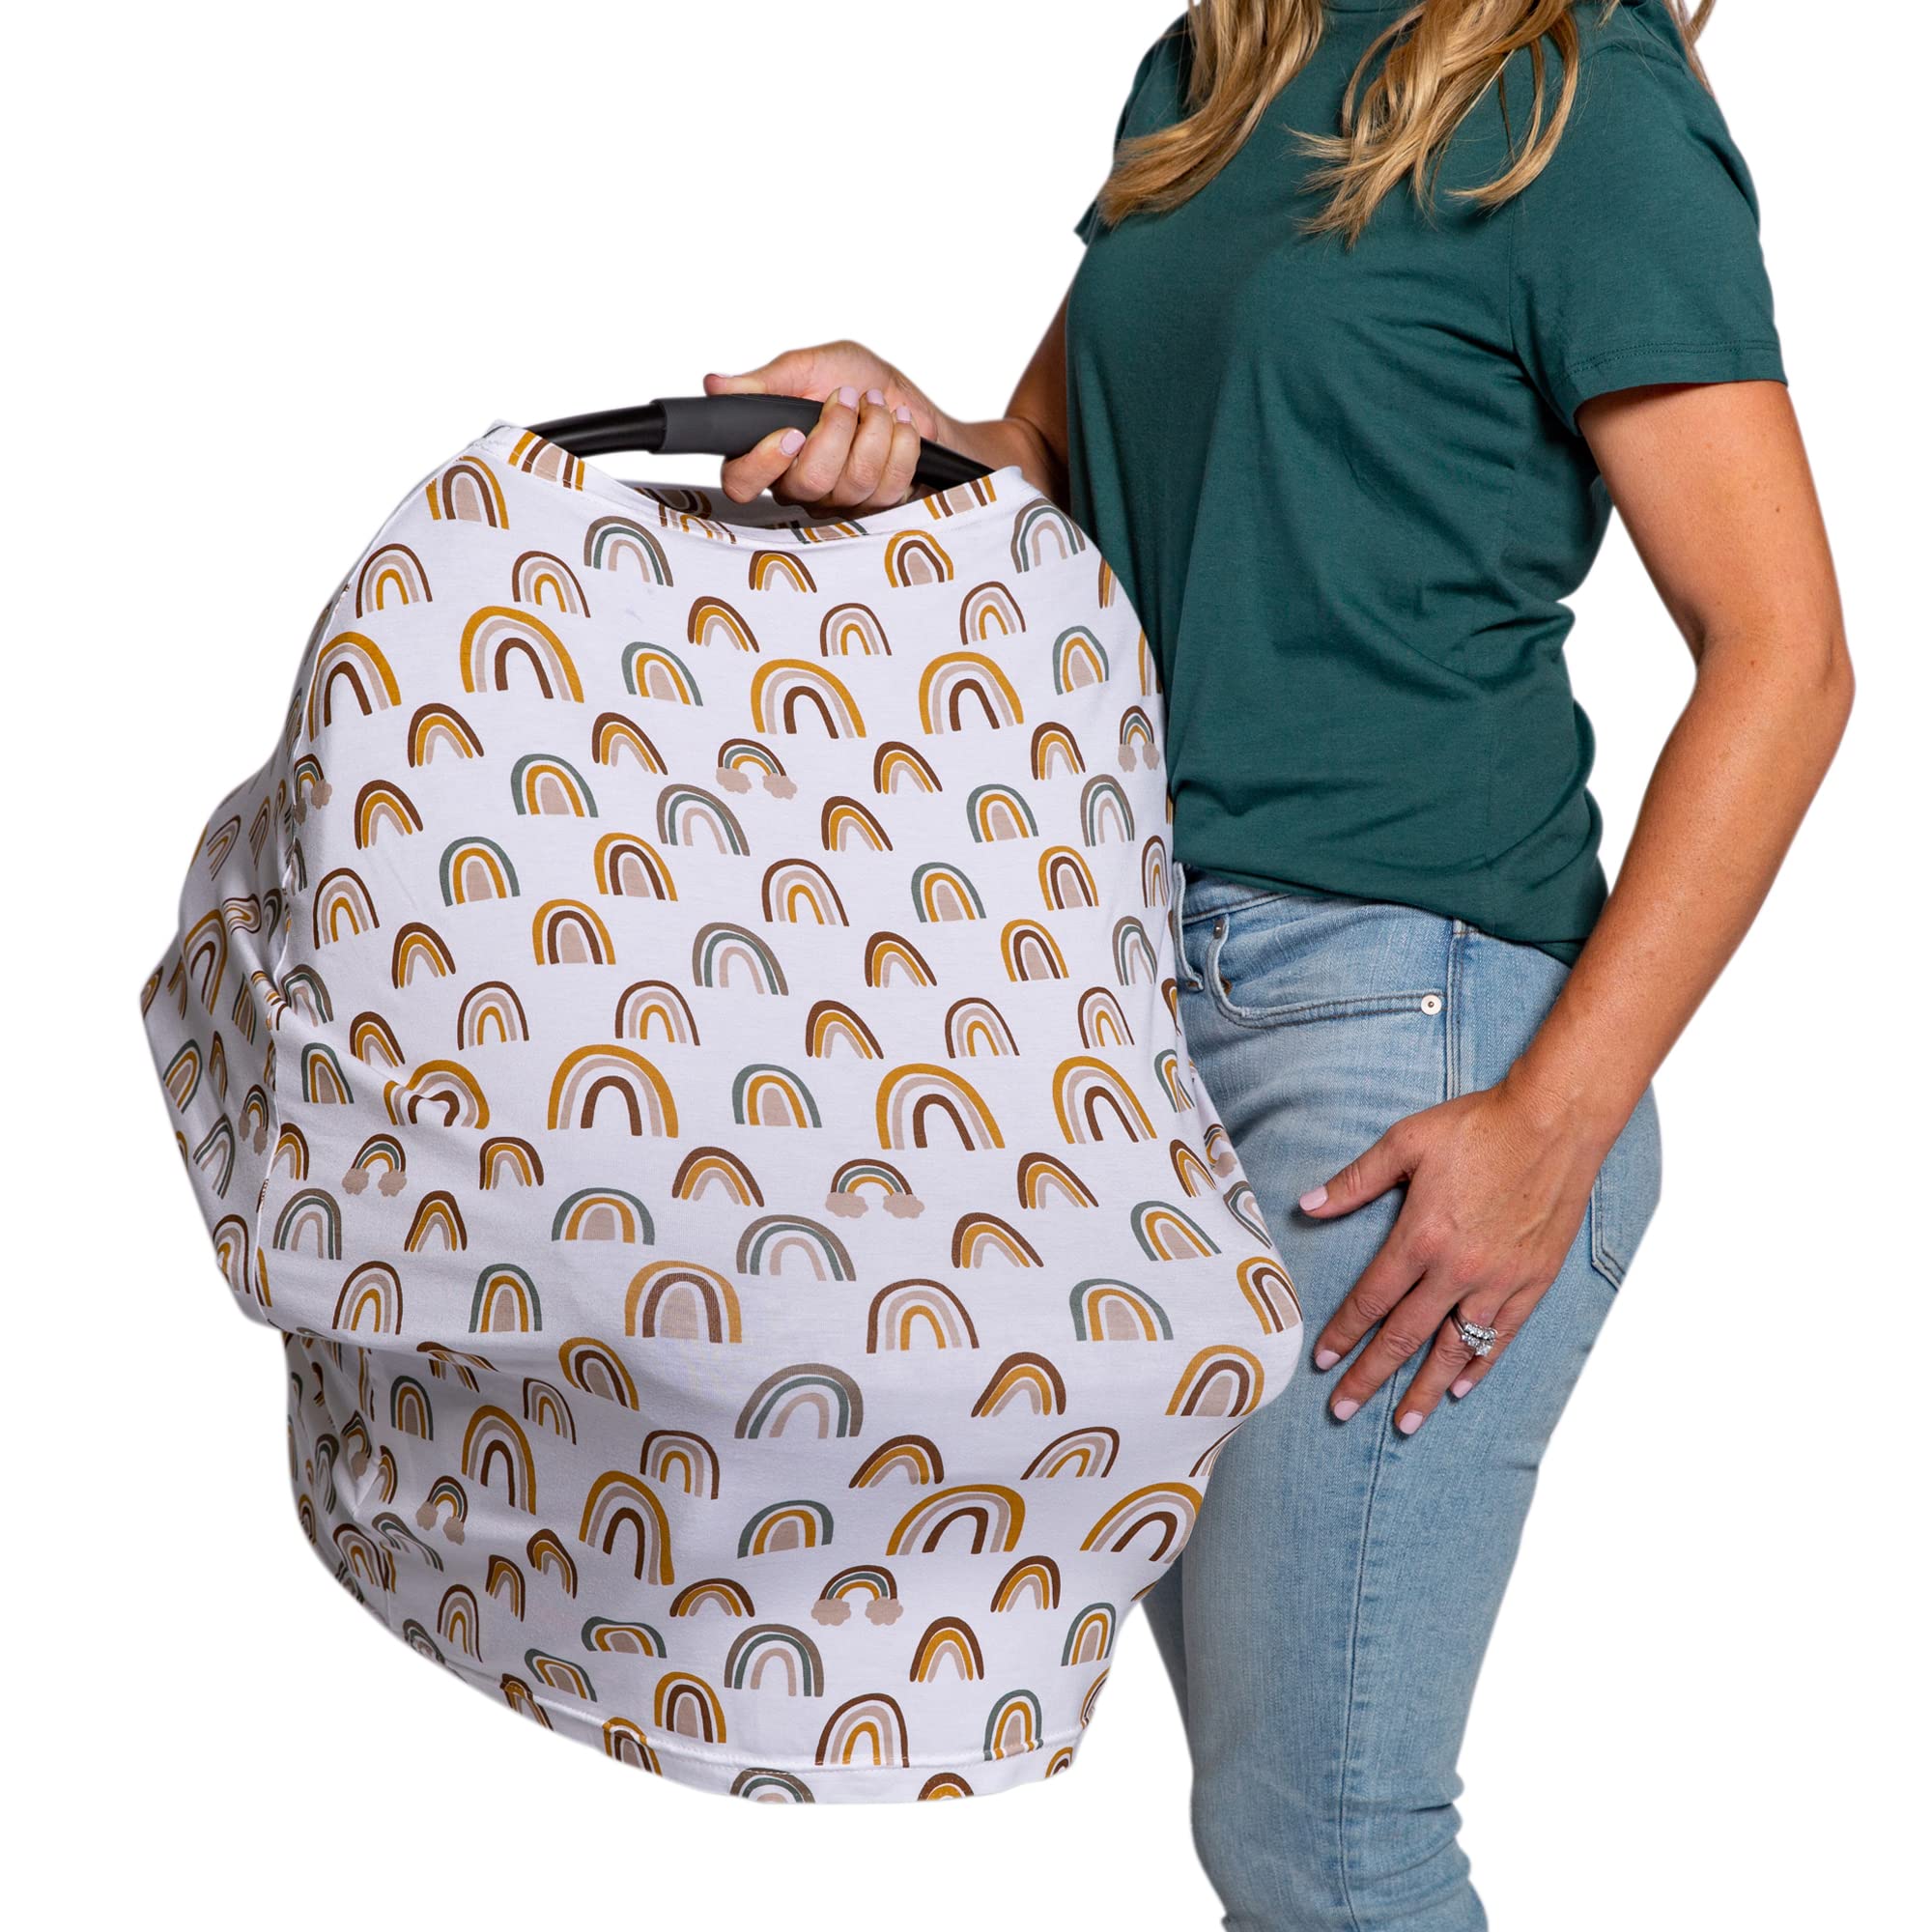 J.L. Childress 4-in-1 Multi-Use Cover - Stretchy Car Seat Canopy and Privacy Cover, Breastfeeding Nursing Cover, Feathers